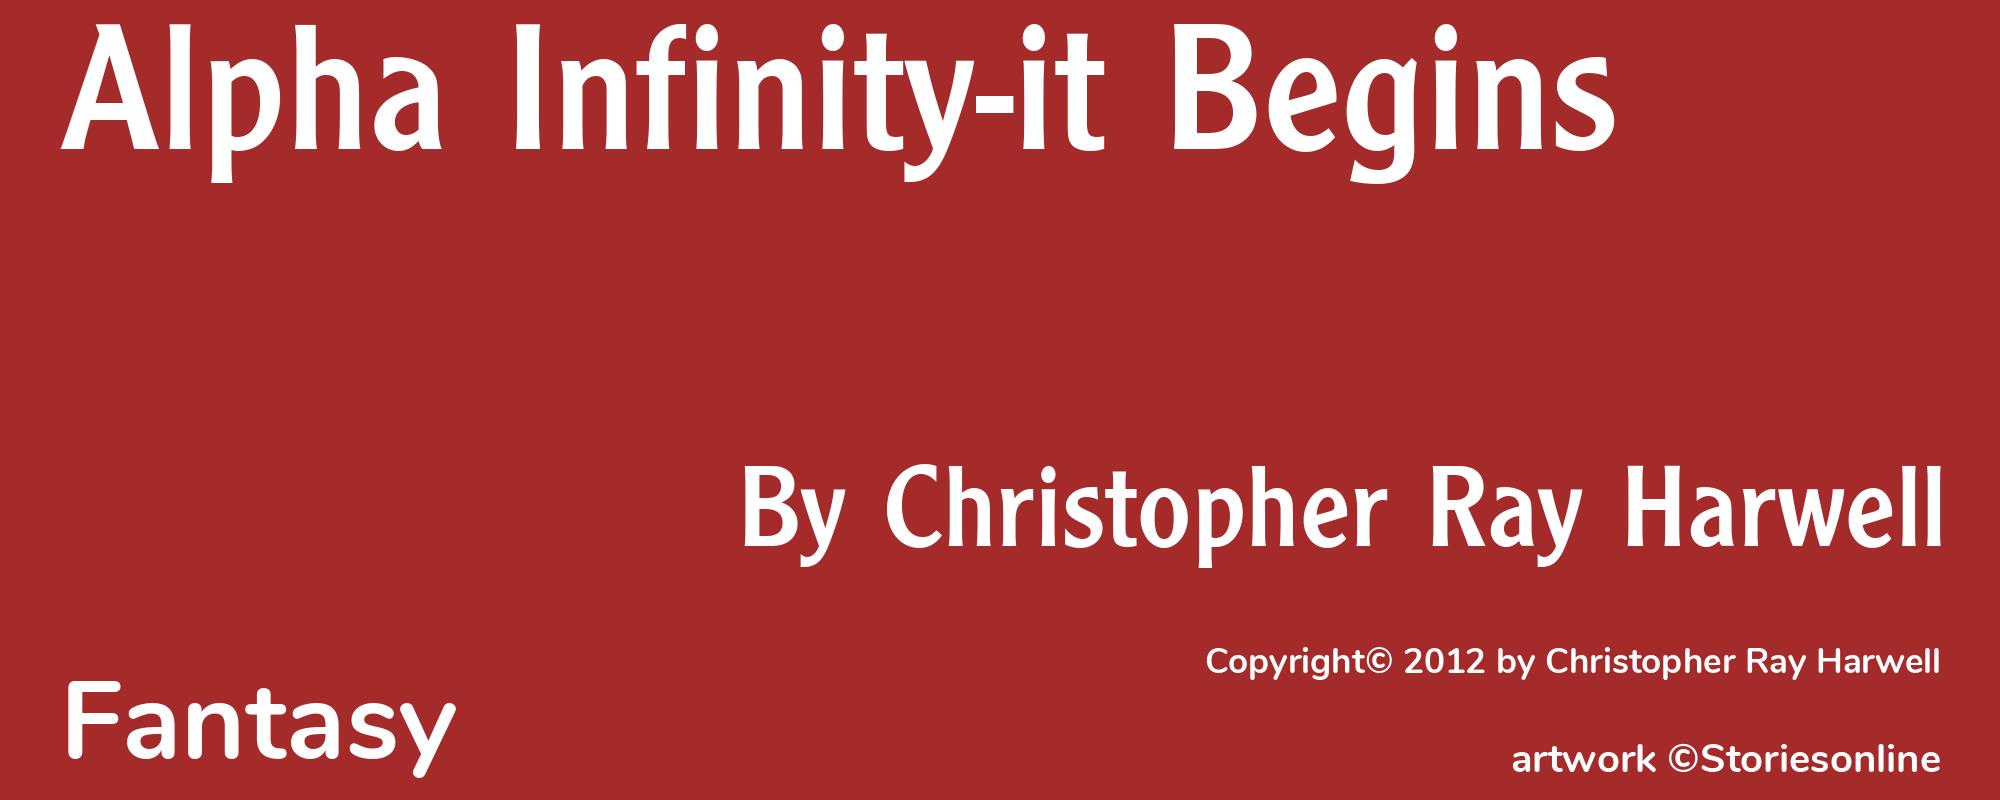 Alpha Infinity-it Begins - Cover